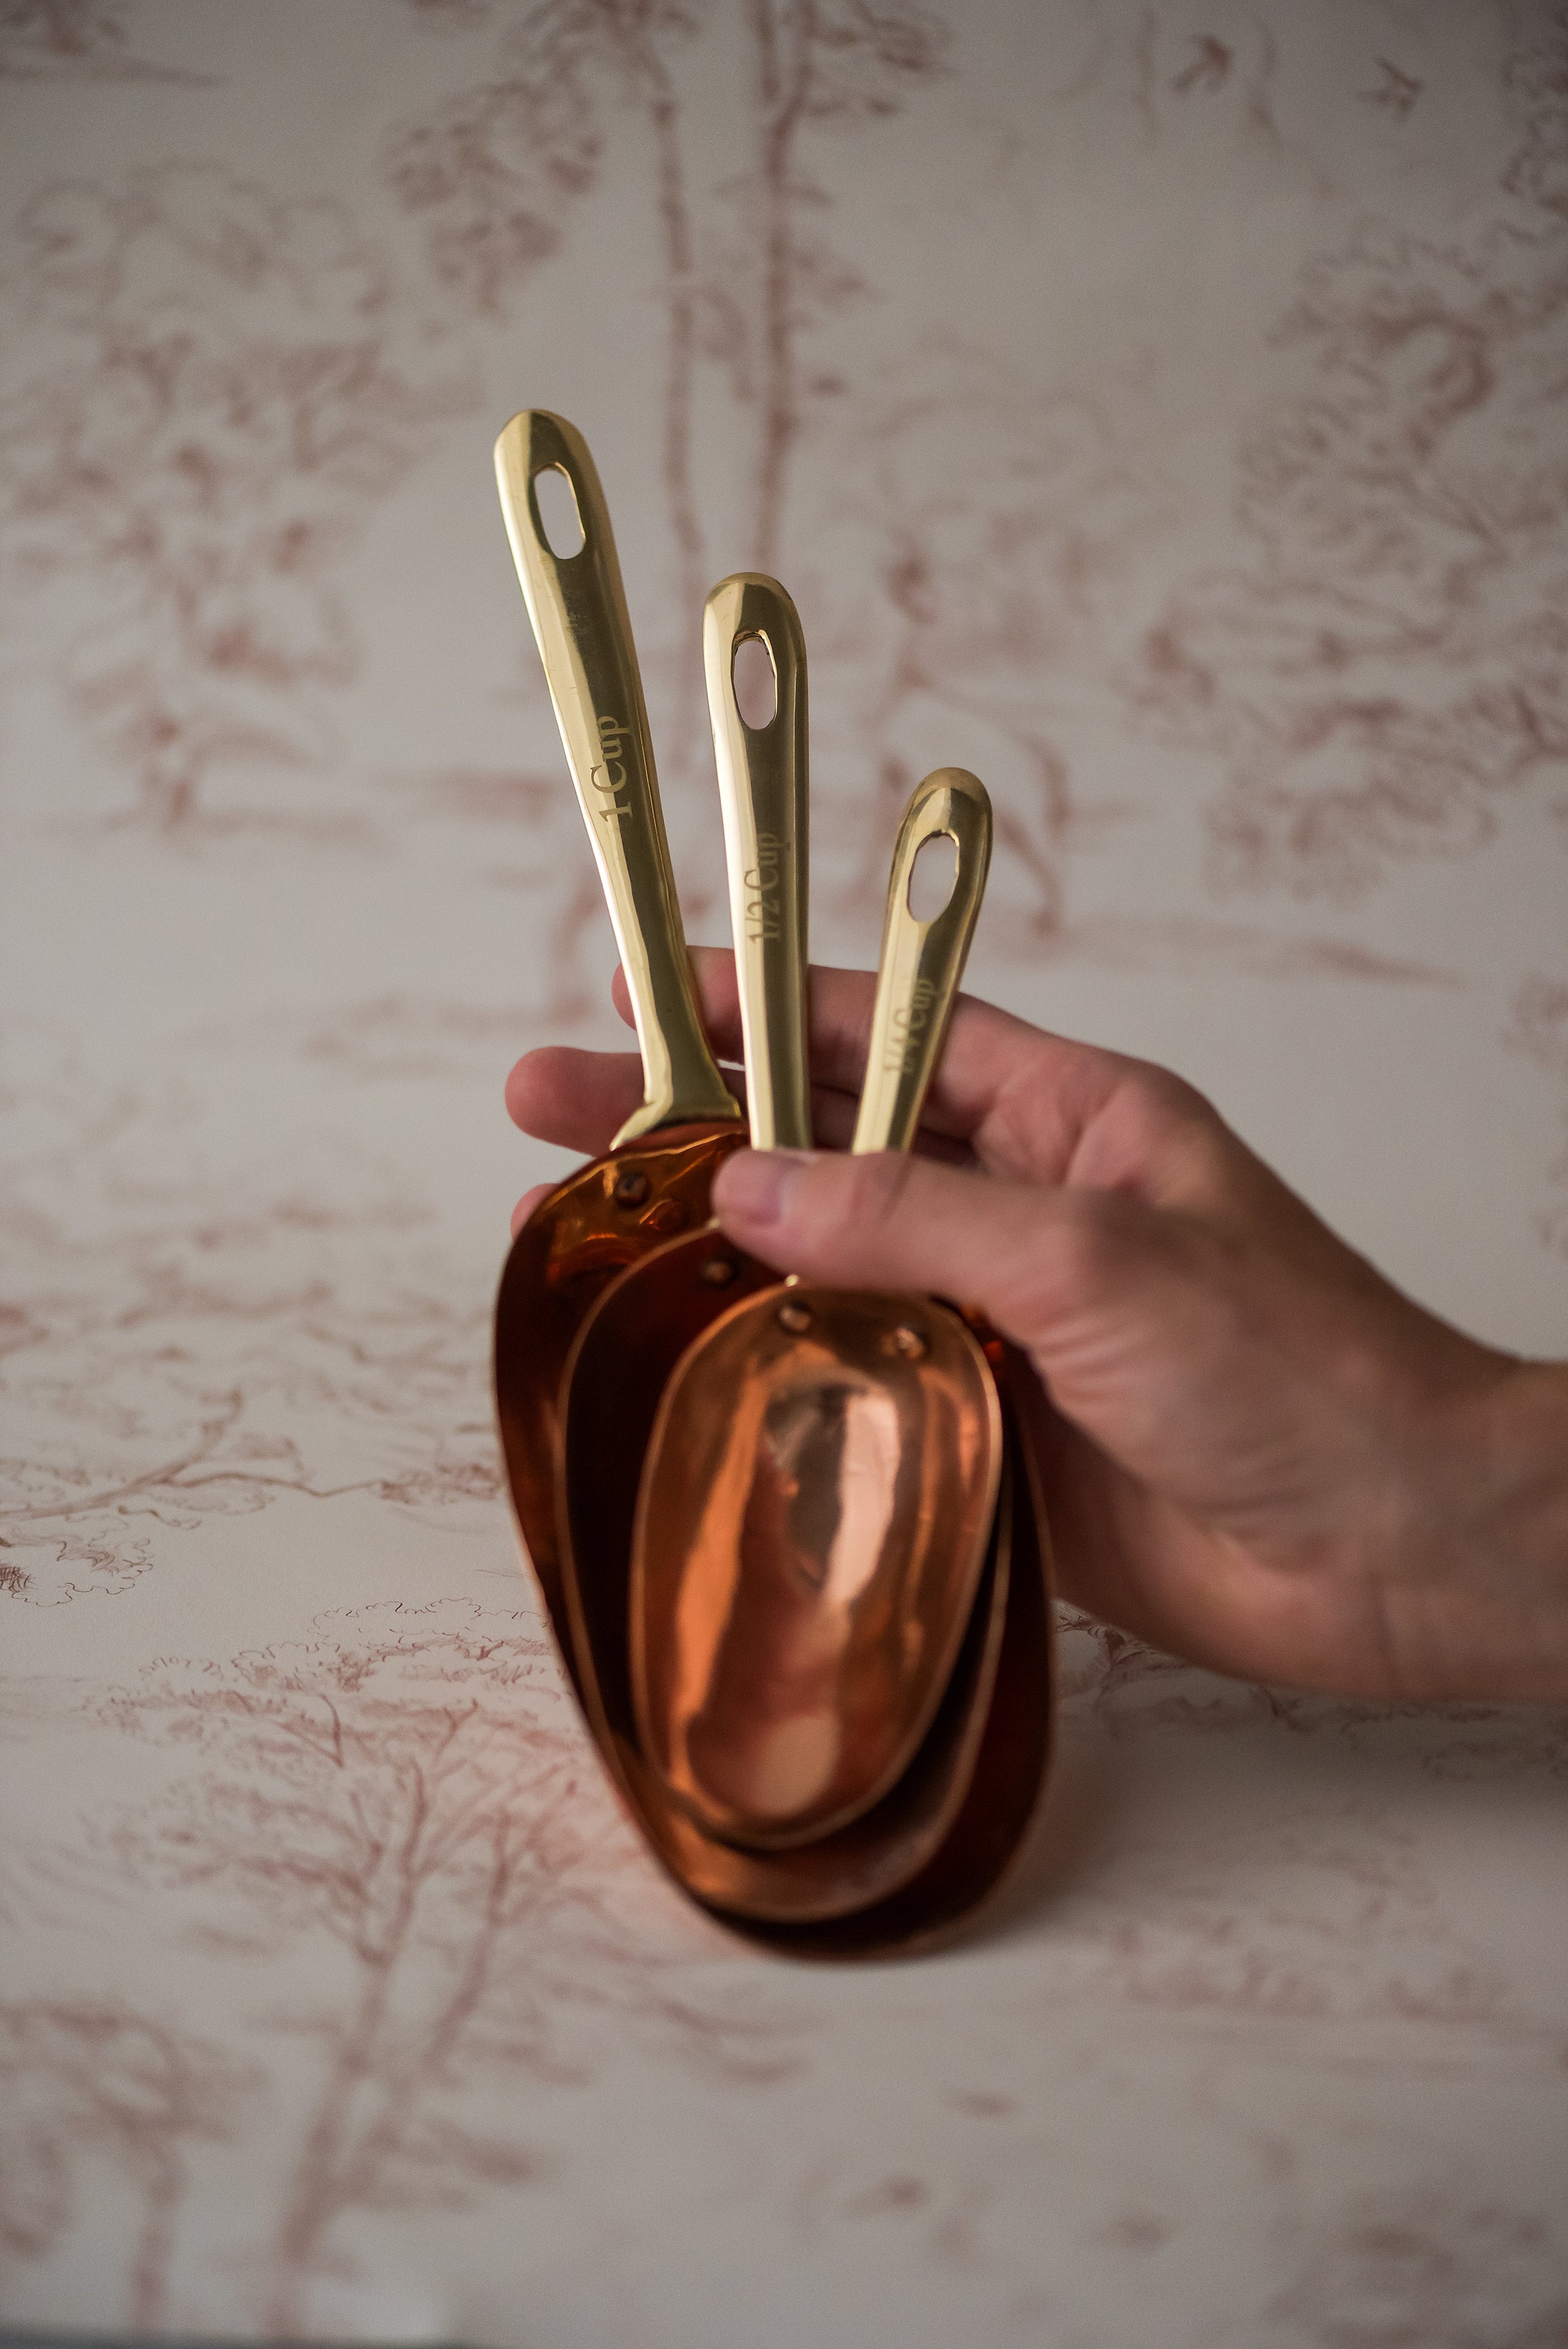 Copper & Brass Measuring Spoons & Cups Set